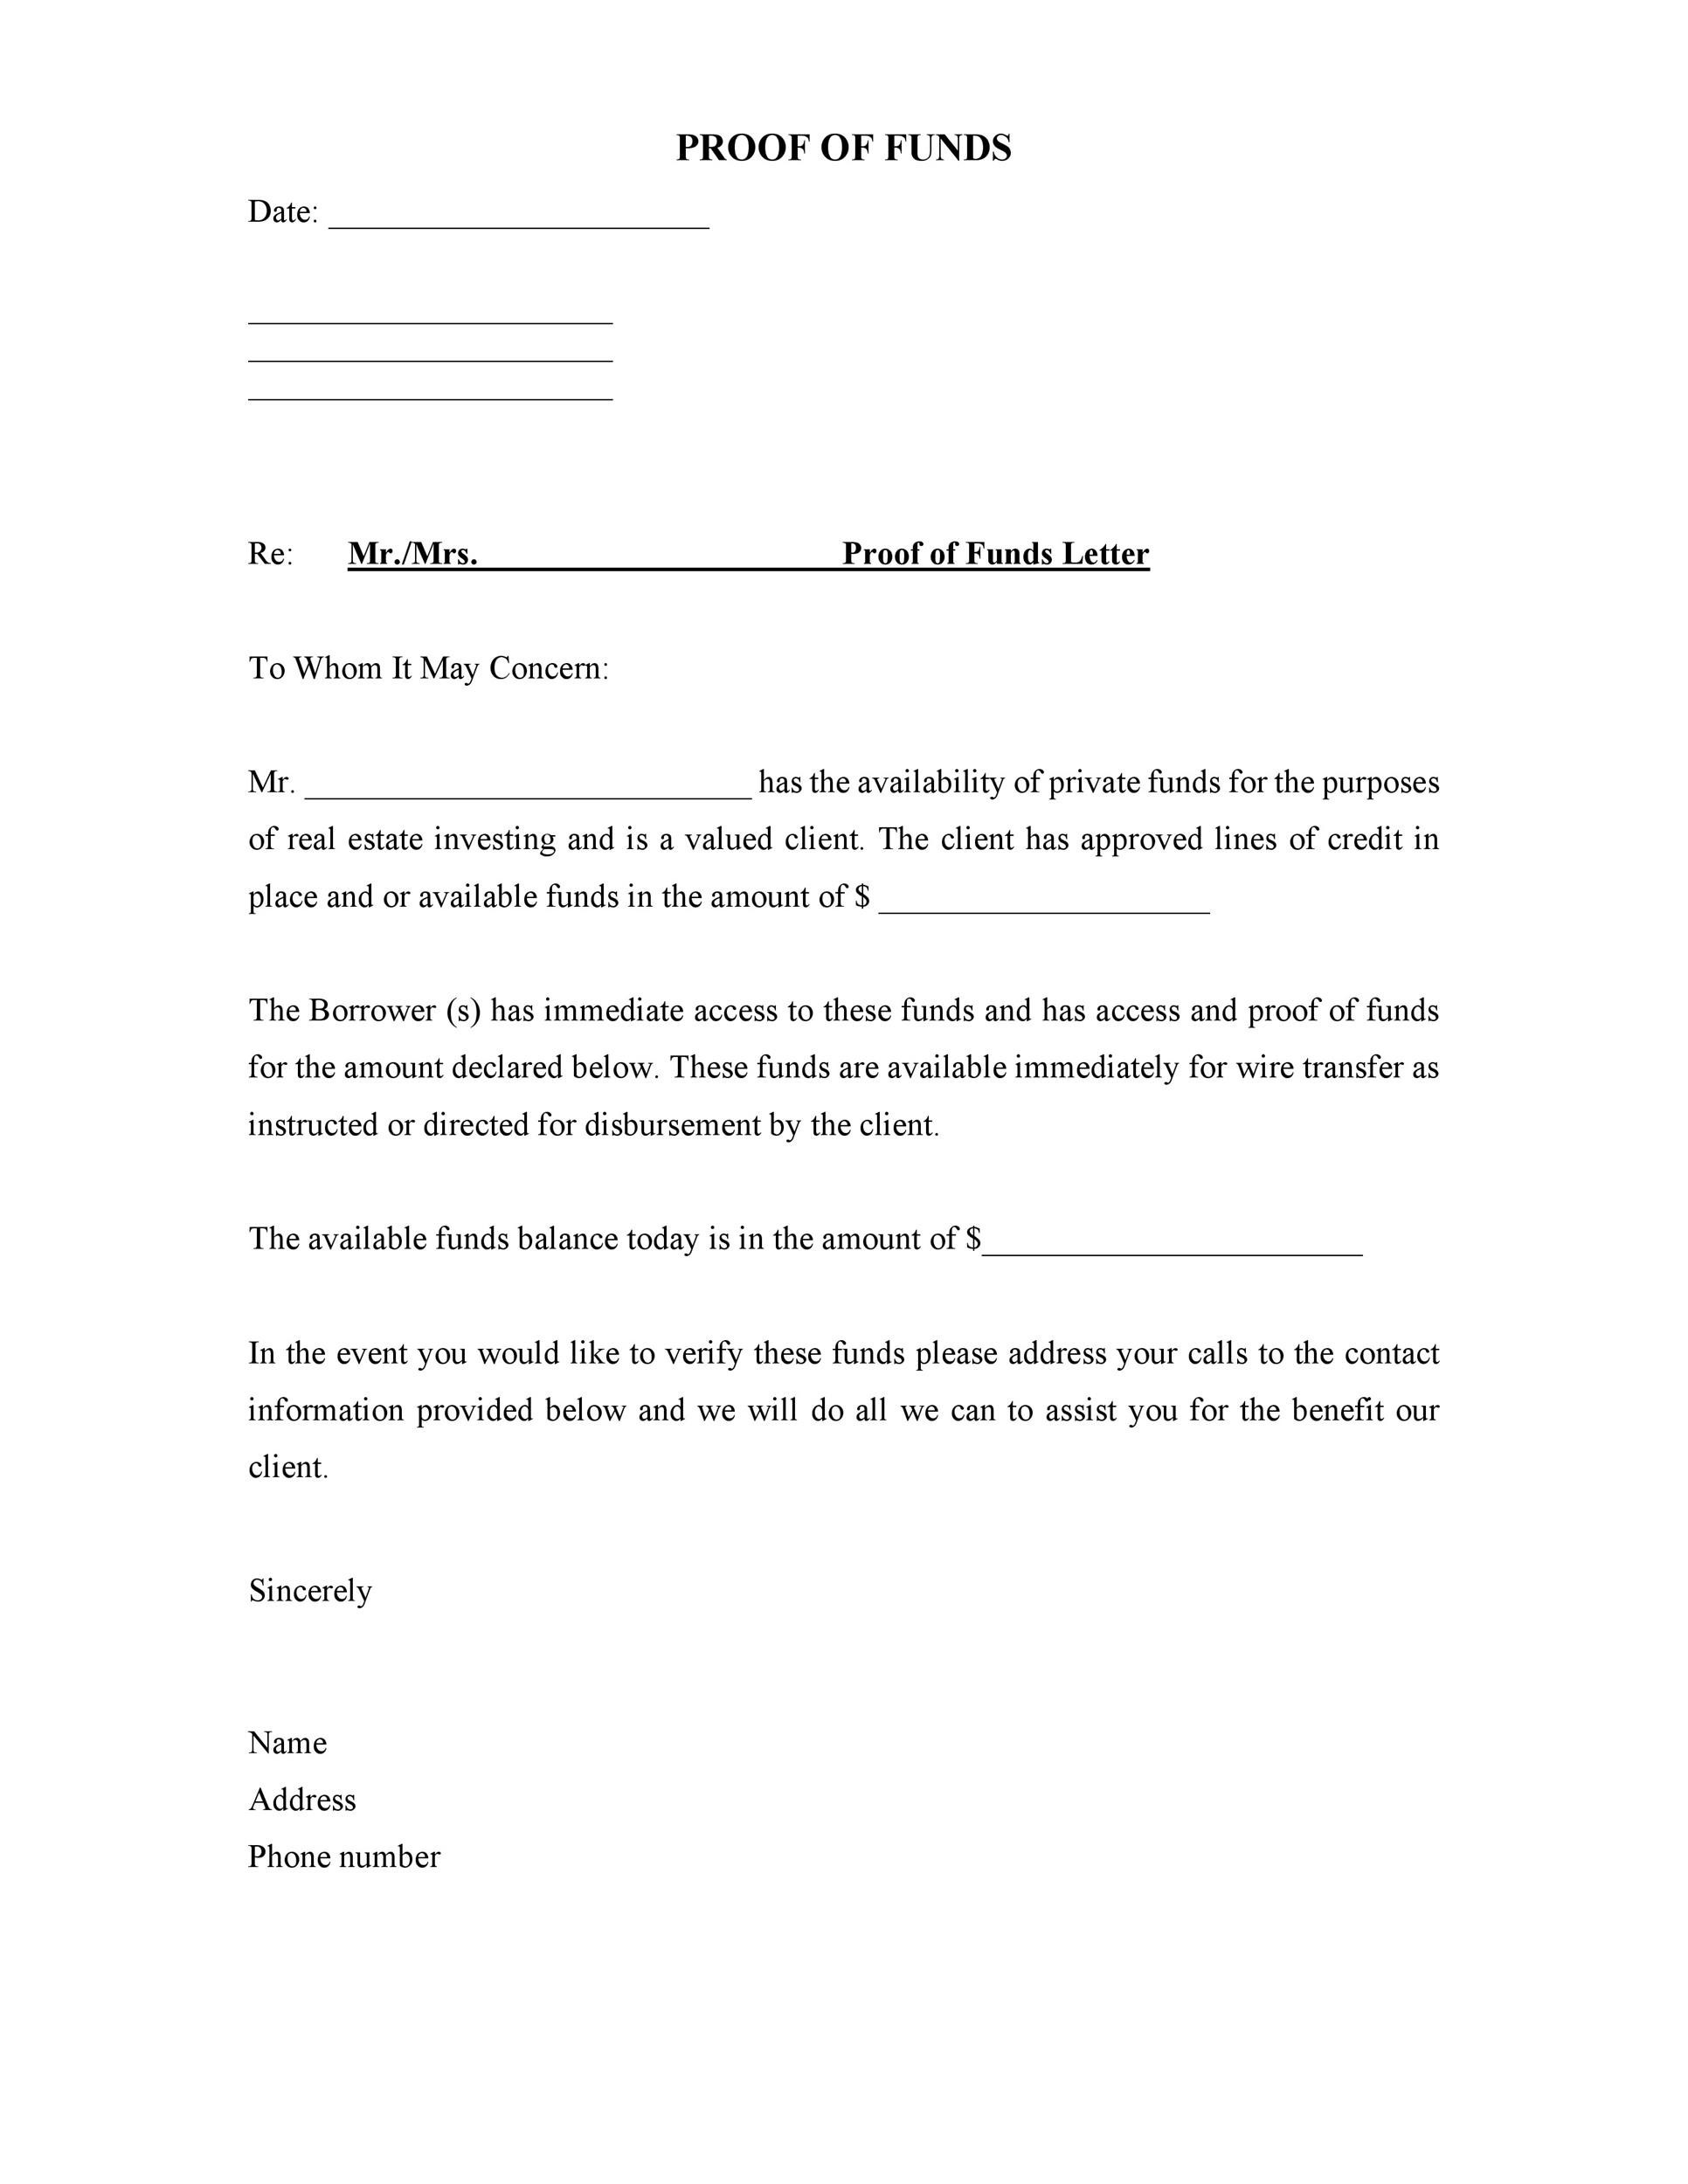 10 Best Proof of Funds Letter Templates ᐅ TemplateLab For Proof Of Deposit Template In Proof Of Deposit Template